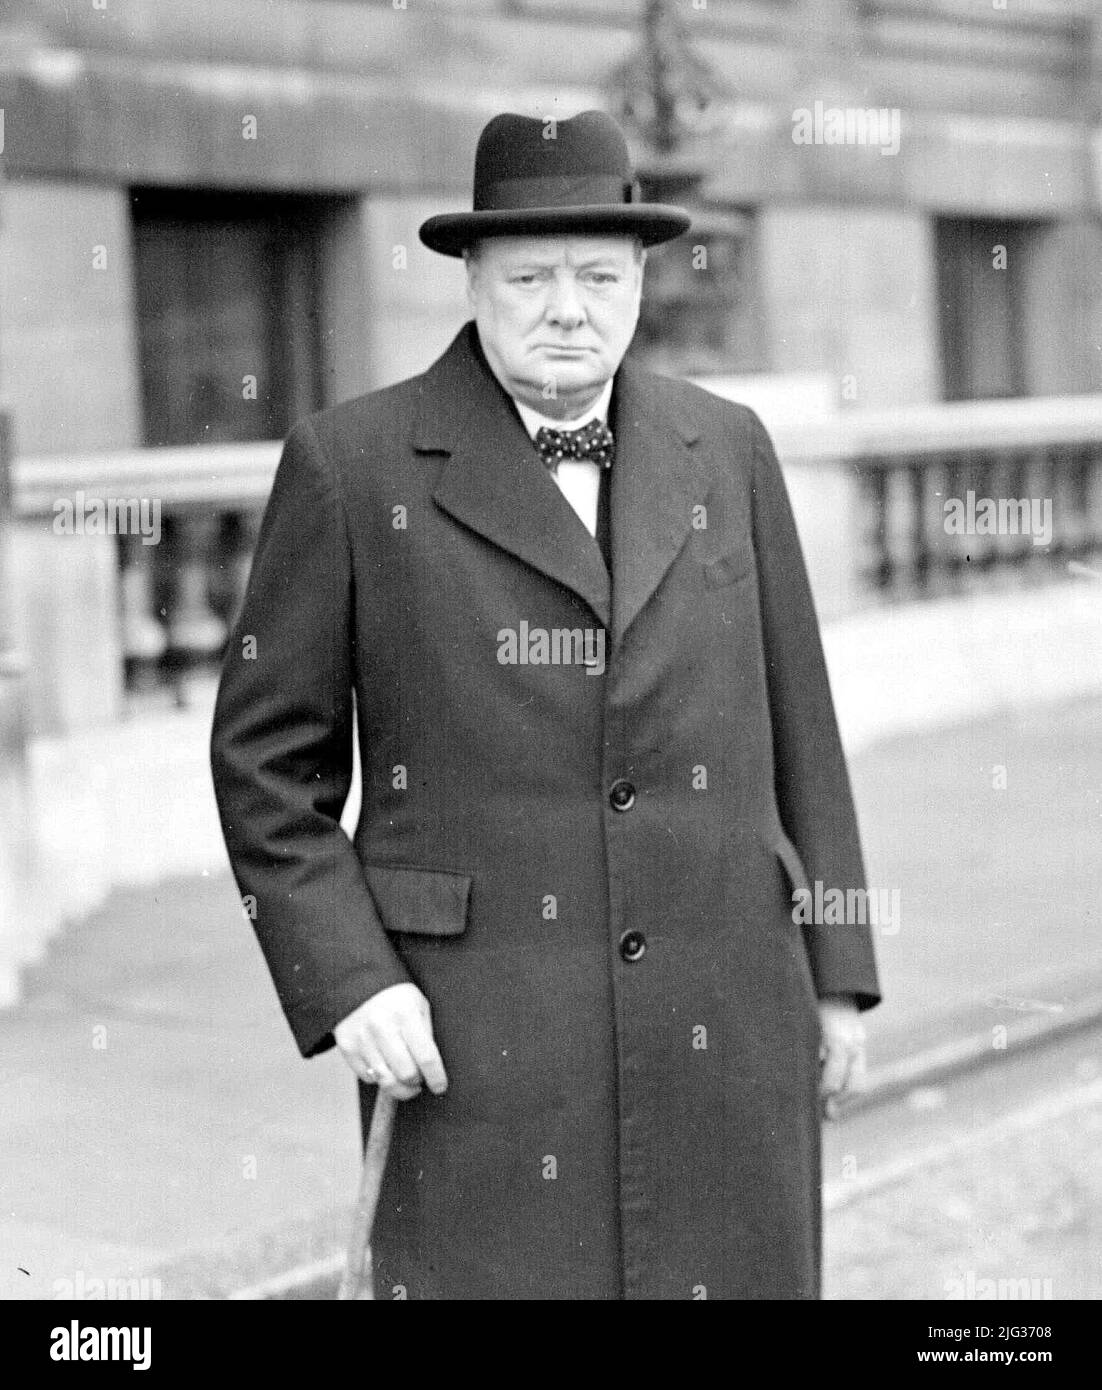 Undated file photo of former Prime Minister Winston Churchill on his way to a War Council meeting. Boris Johnson has now overtaken six prime ministers with the shortest time in office since 1900: Andrew Bonar Law (211 days in 1922-23), Alec Douglas-Home (364 days in 1963-64), Anthony Eden (644 days in 1955-57), Henry Campbell-Bannerman (852 days in 1905-08), Gordon Brown (1,049 days in 2007-10) and Neville Chamberlain (1,078 days in 1937-40). Issue date: Thursday July 7, 2022. Stock Photo